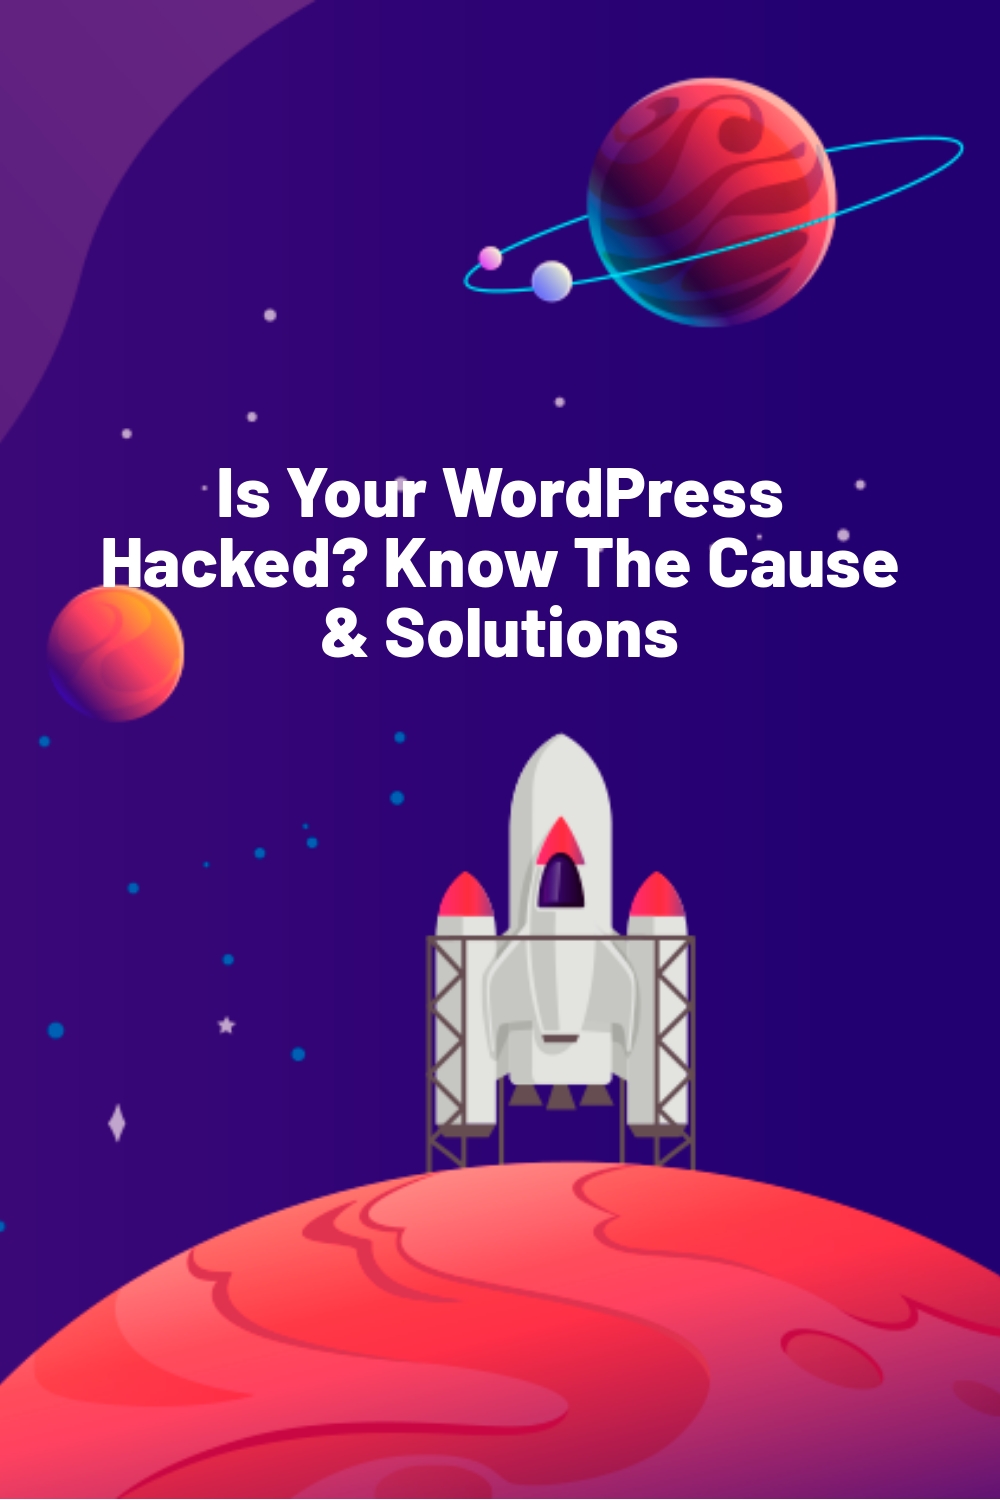 Is Your WordPress Hacked? Know The Cause & Solutions